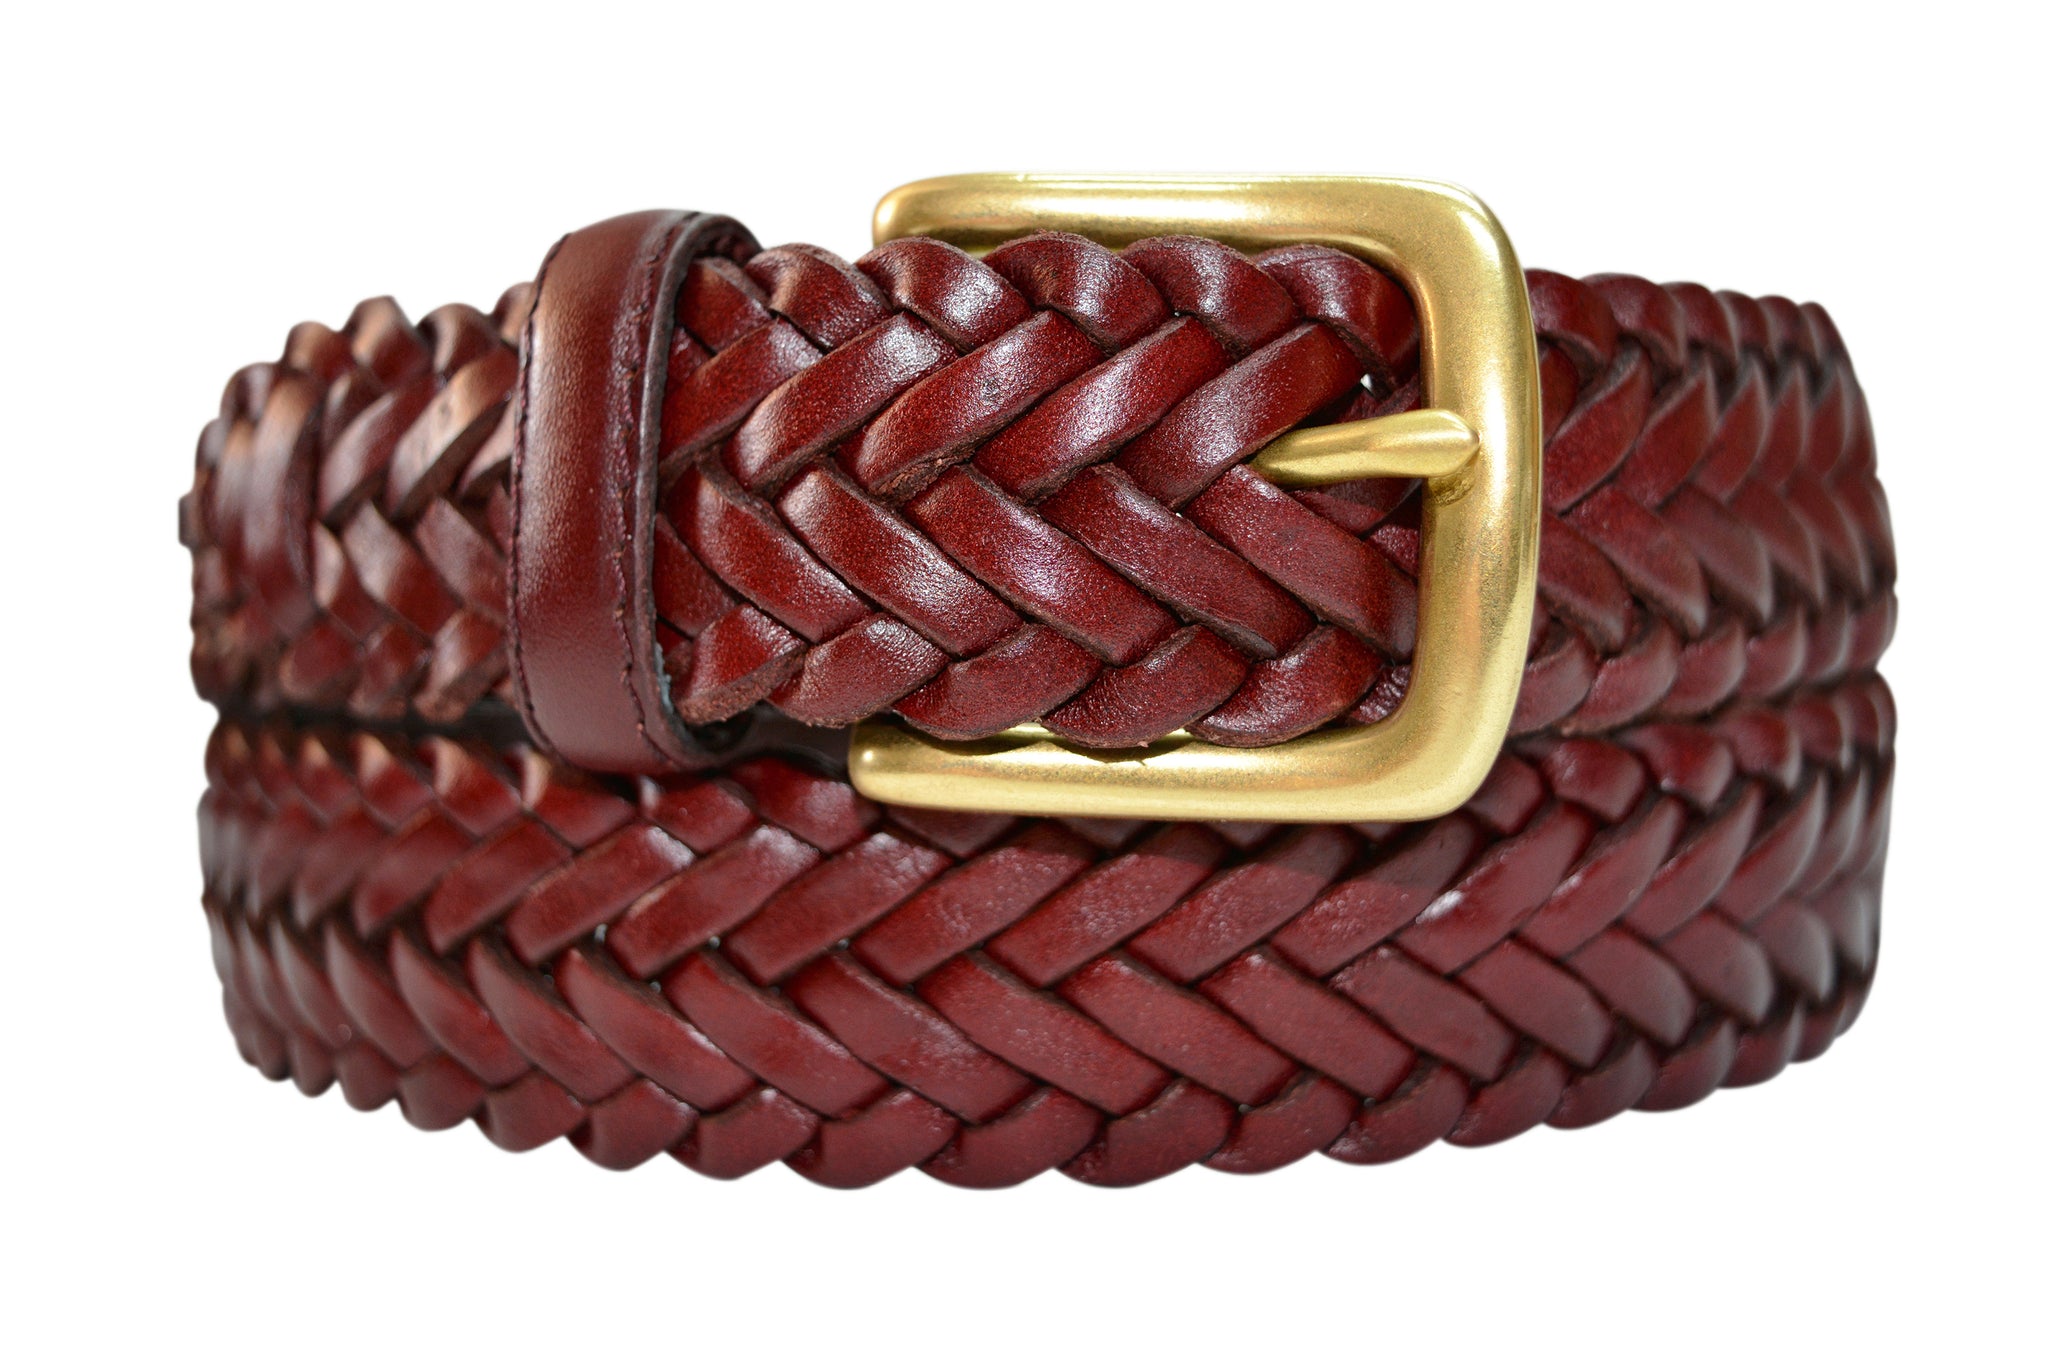 Braided Leather Belt Belts Vintage Leather Goods Woven Basketweave Woven  Cotton Canvas Brown White Red Black Mens Women's Belts -  Canada